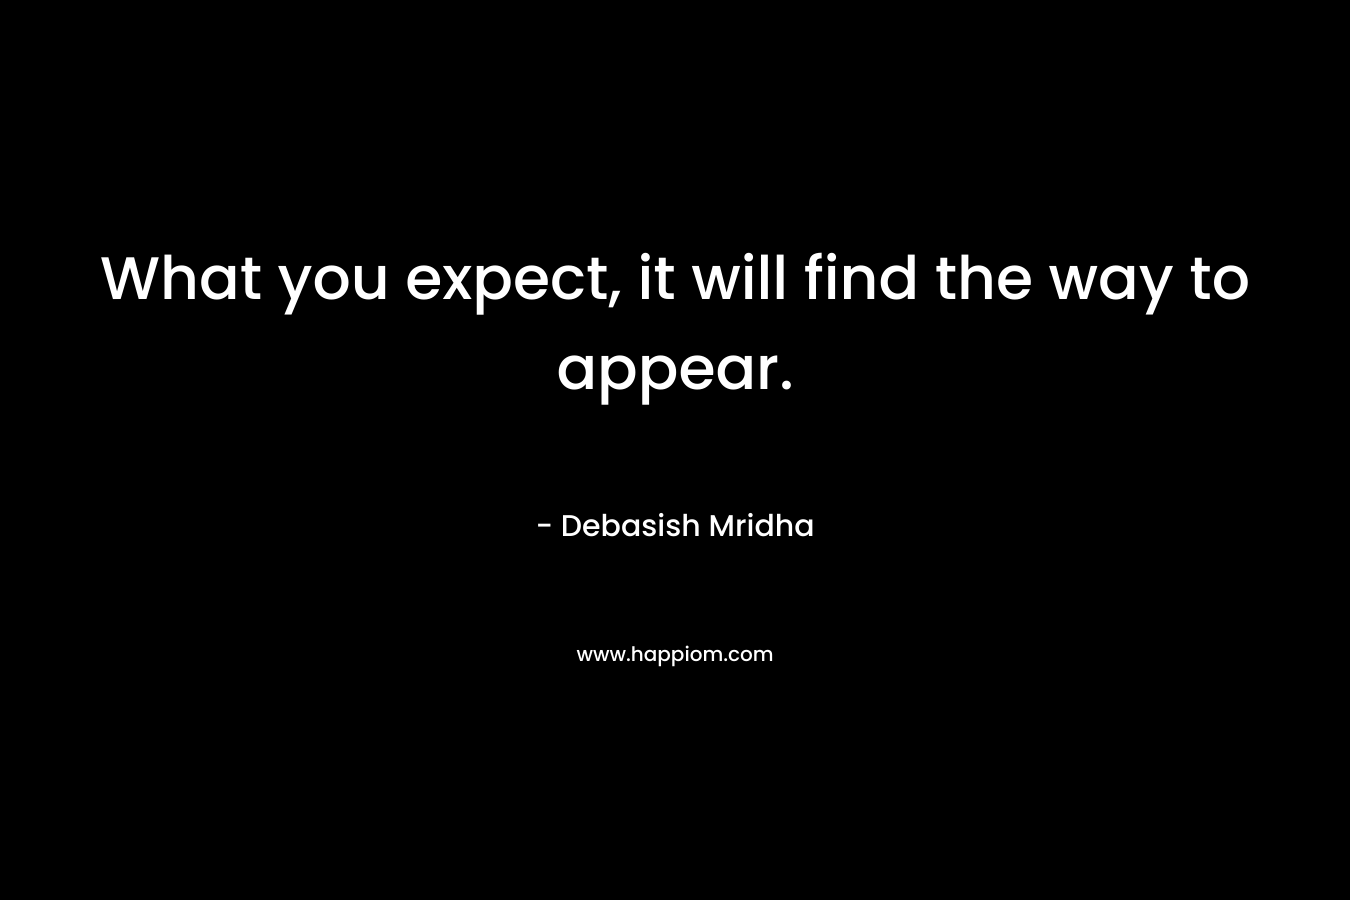 What you expect, it will find the way to appear.